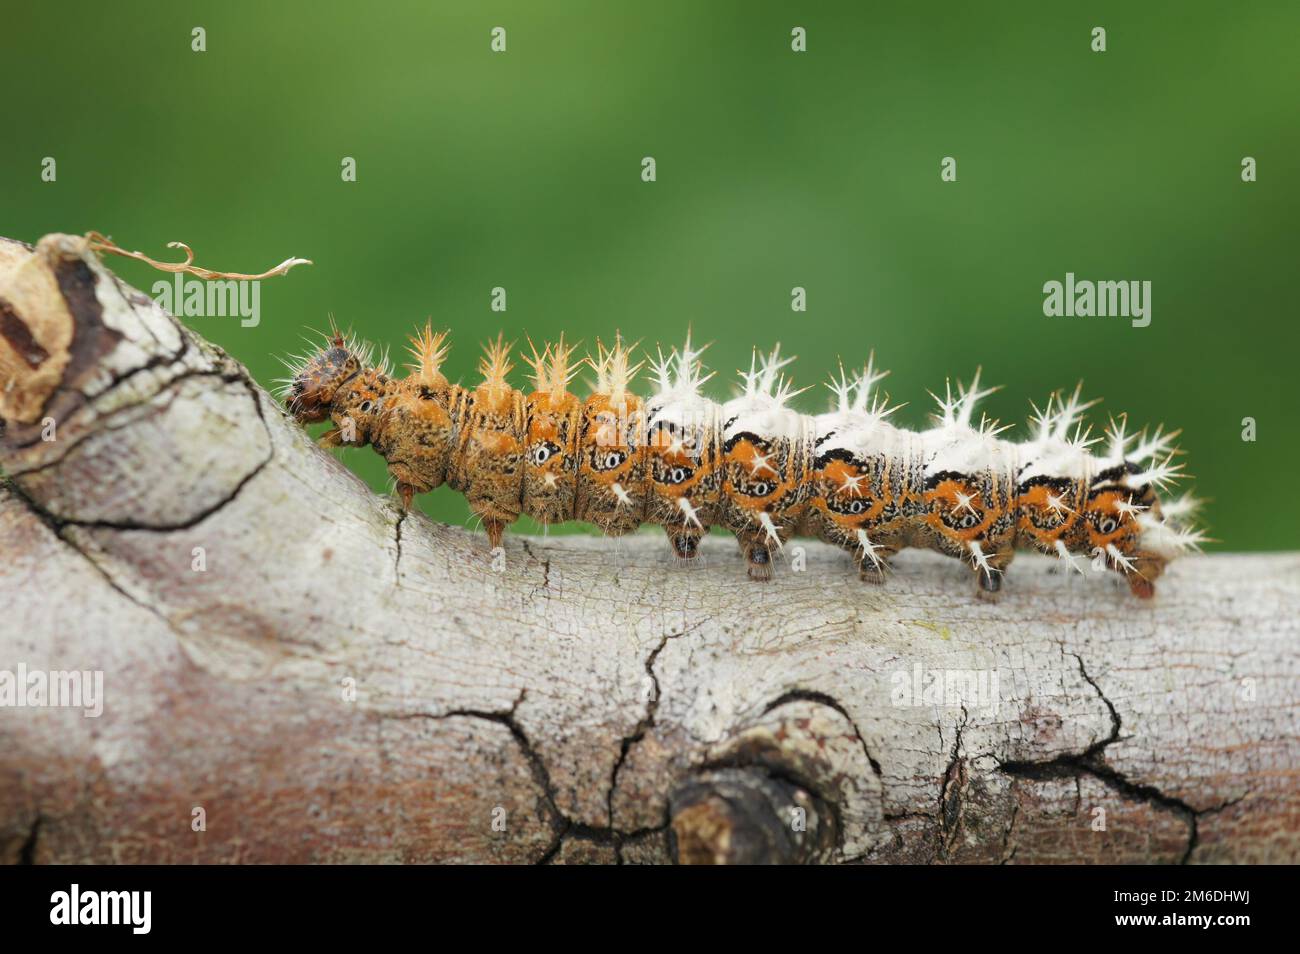 Natural closeup on the spiky caterpillar of the Comma butterfly, Polygonia c- album sitting on a twig Stock Photo